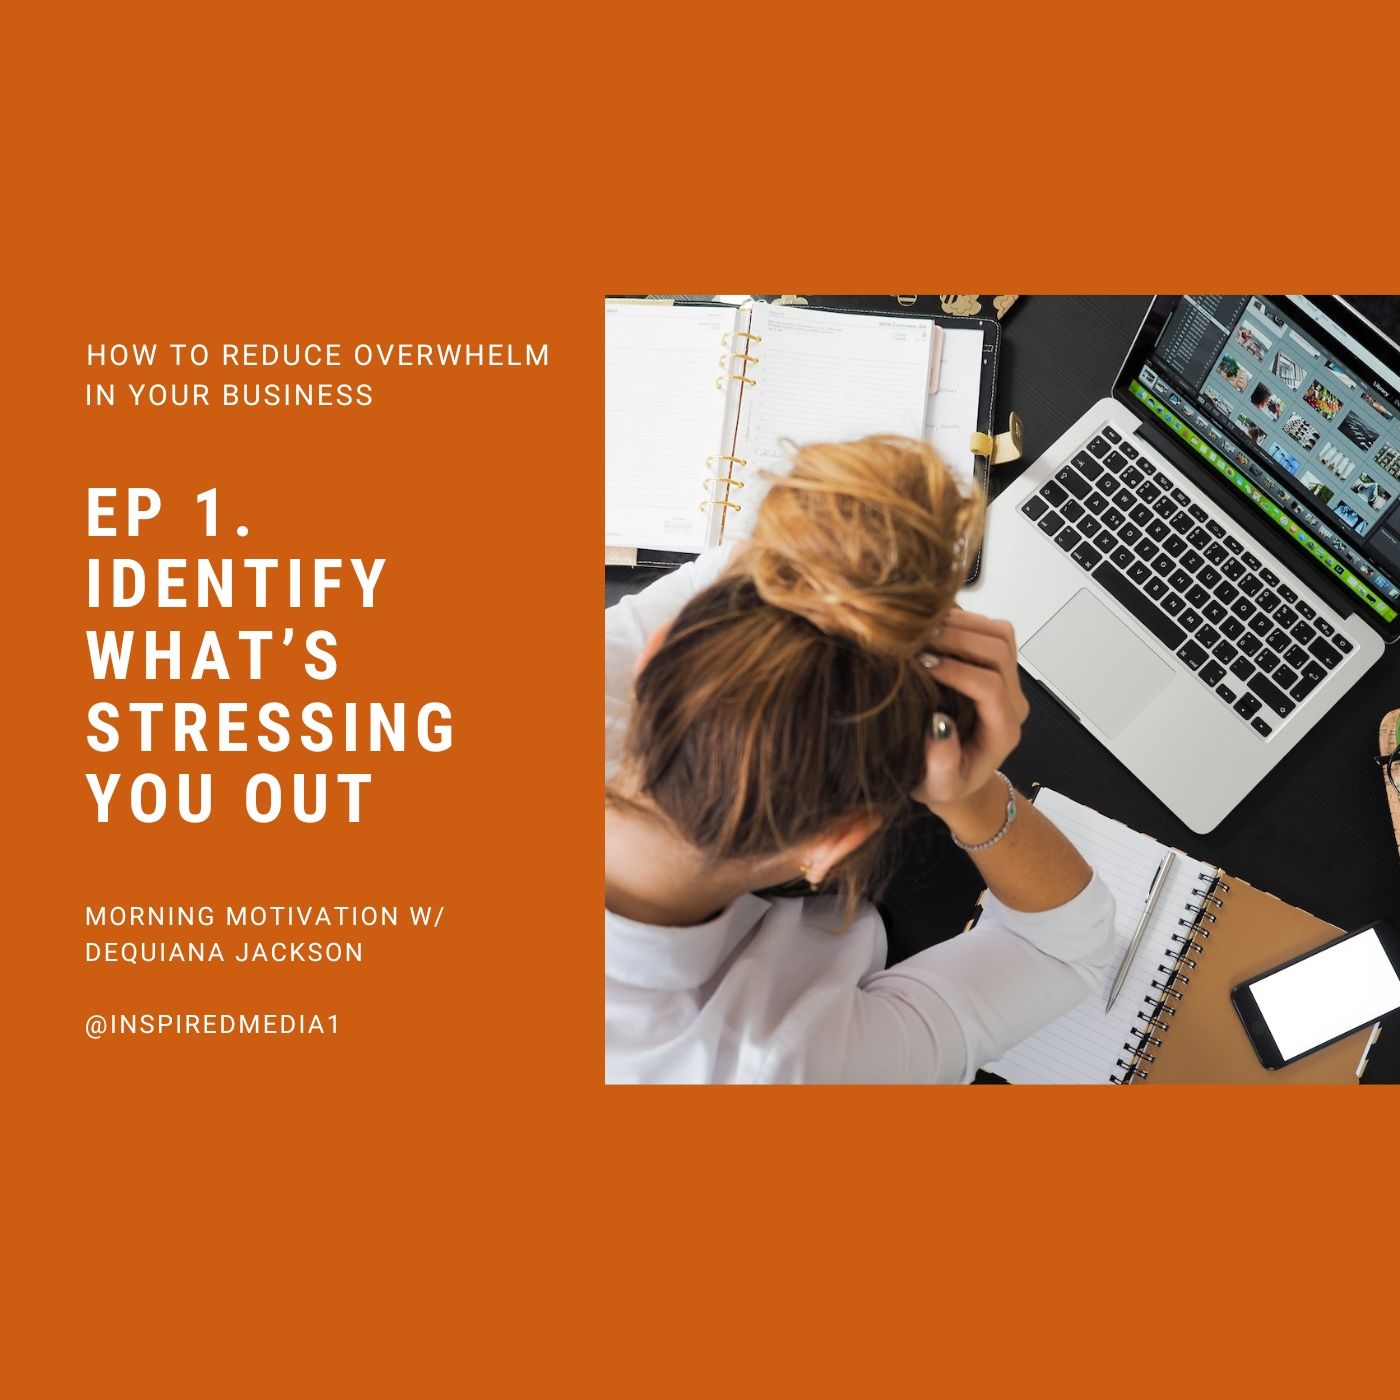 Identify What's Stressing You Out - How to Reduce Overwhelm in Your Business Ep. 1